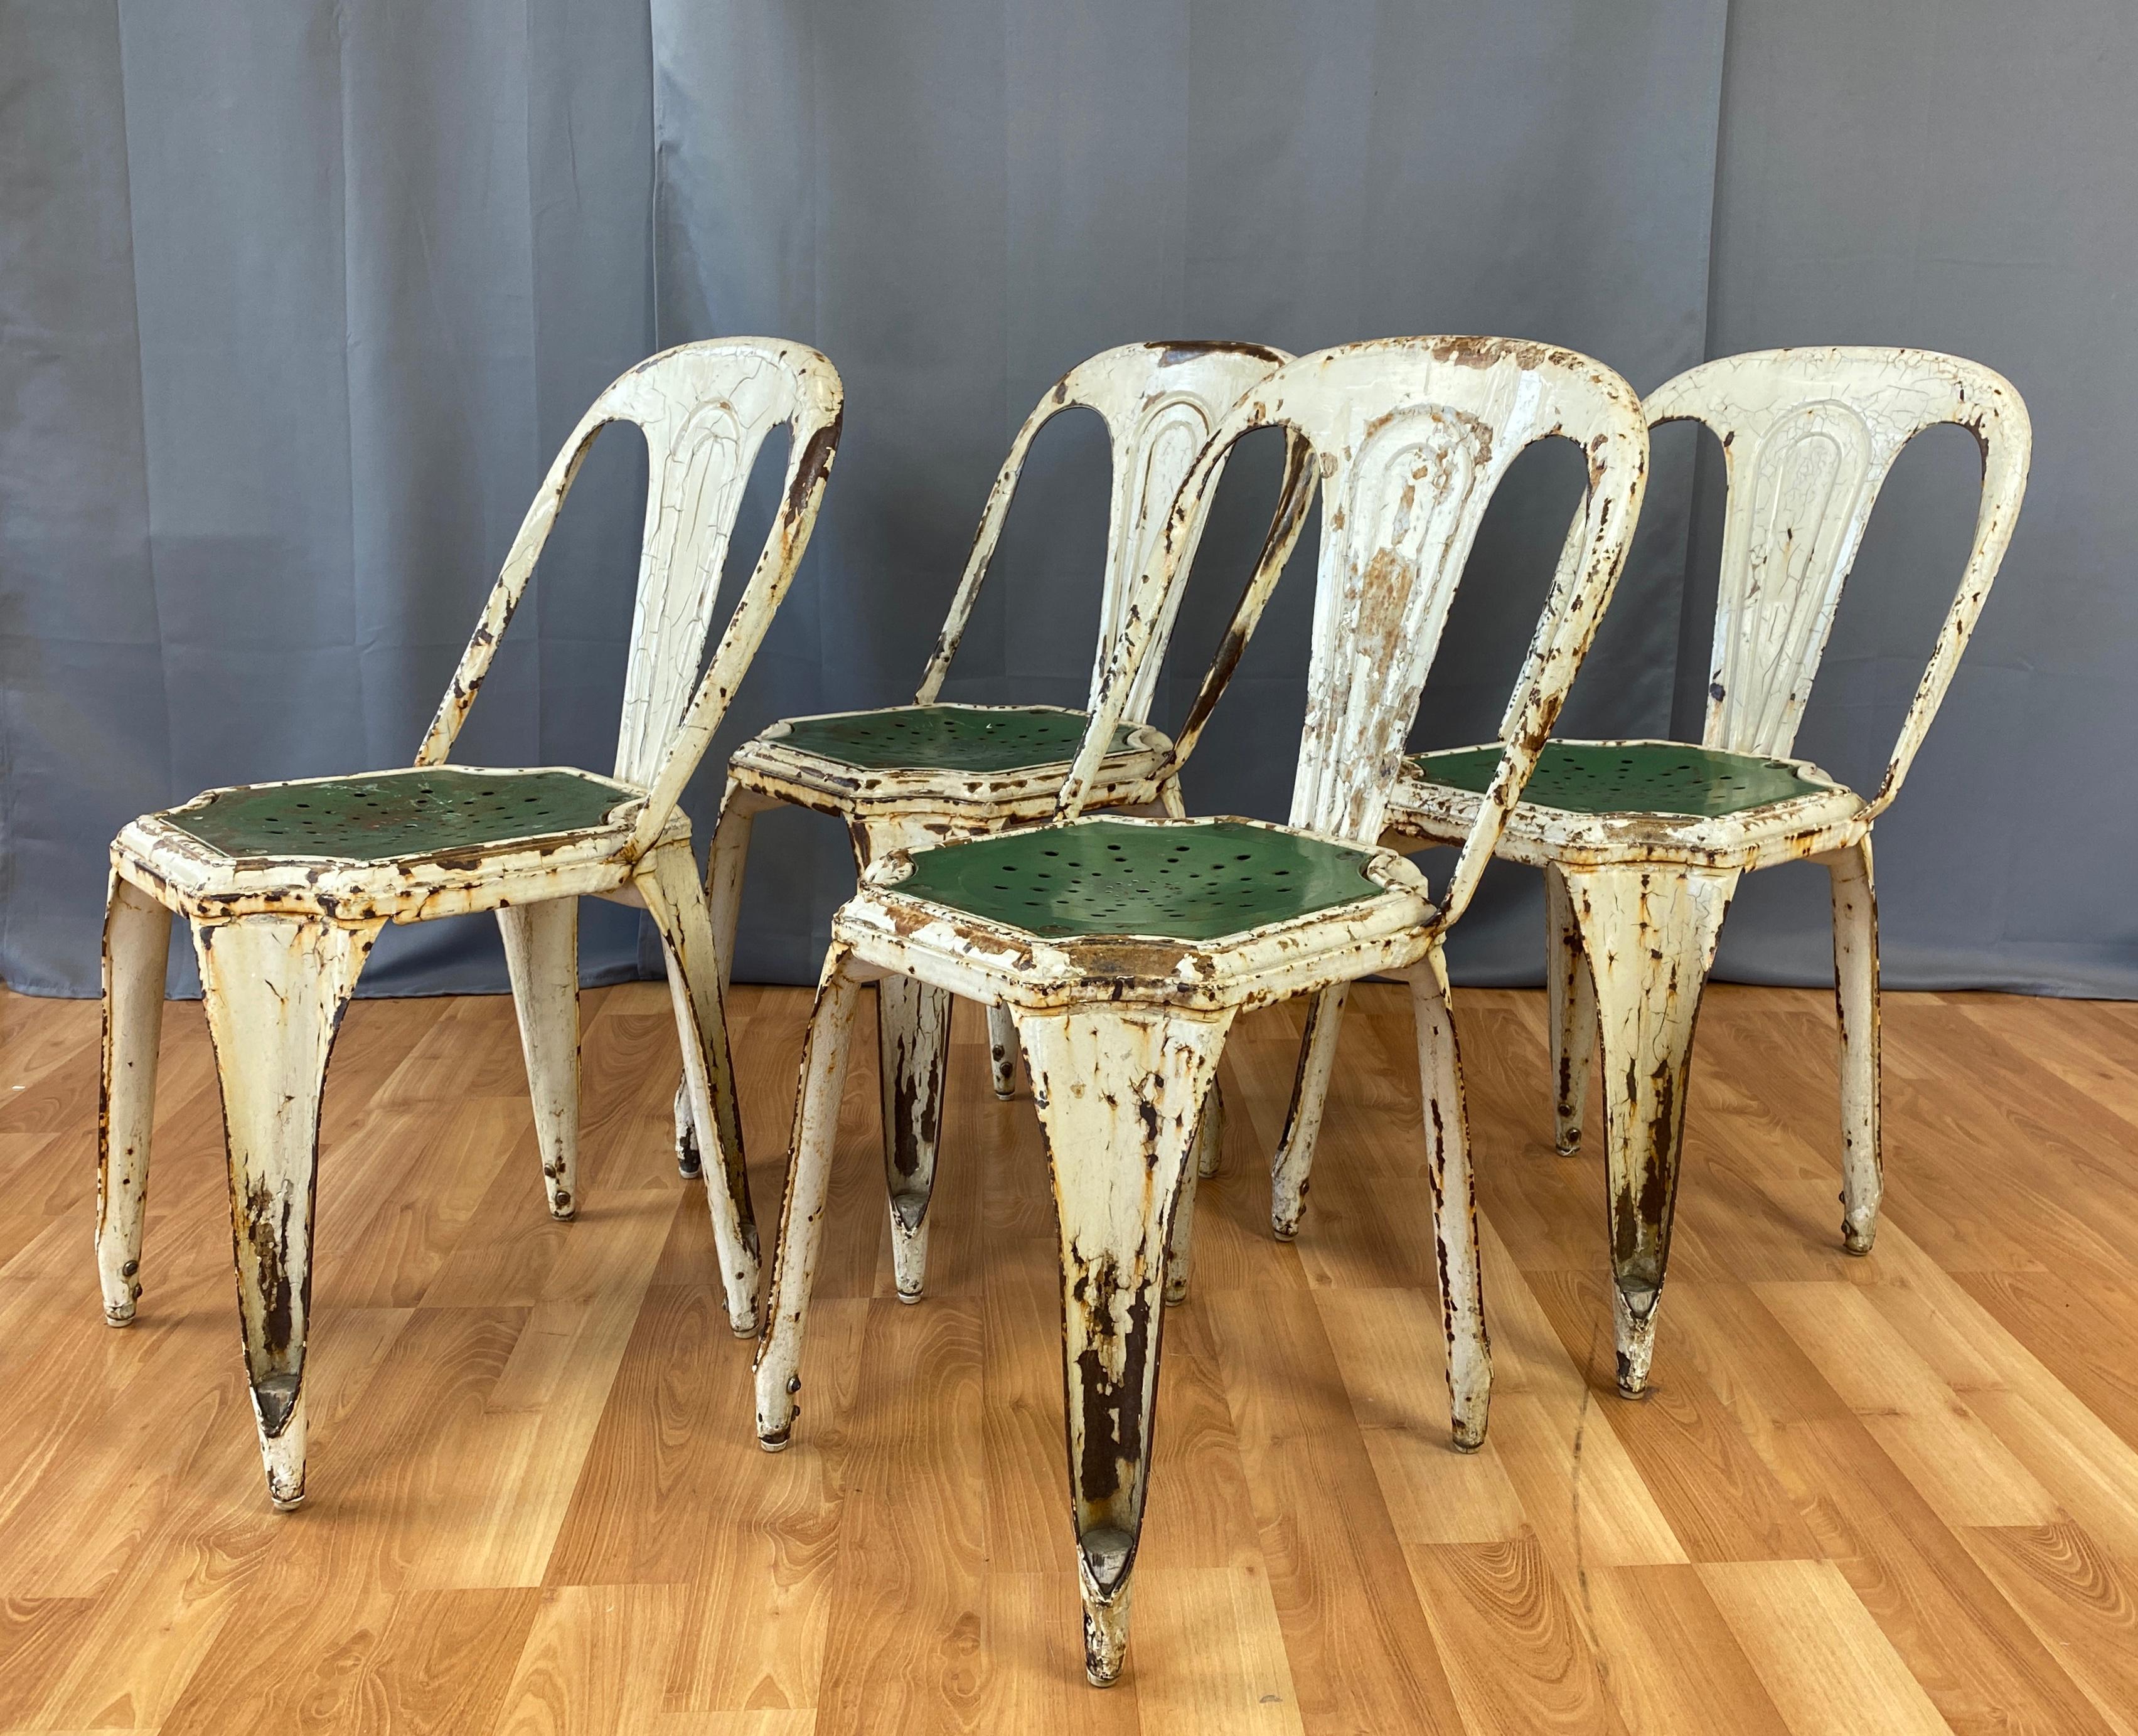 Set of four stackable industrial bistro chairs by Fibrocit of Belgium.
Produced in the 1950s, all metal in an off-white with green seats.
They have a handsome amount of age appropriate patina earned from years of outdoor cafe service, gives them